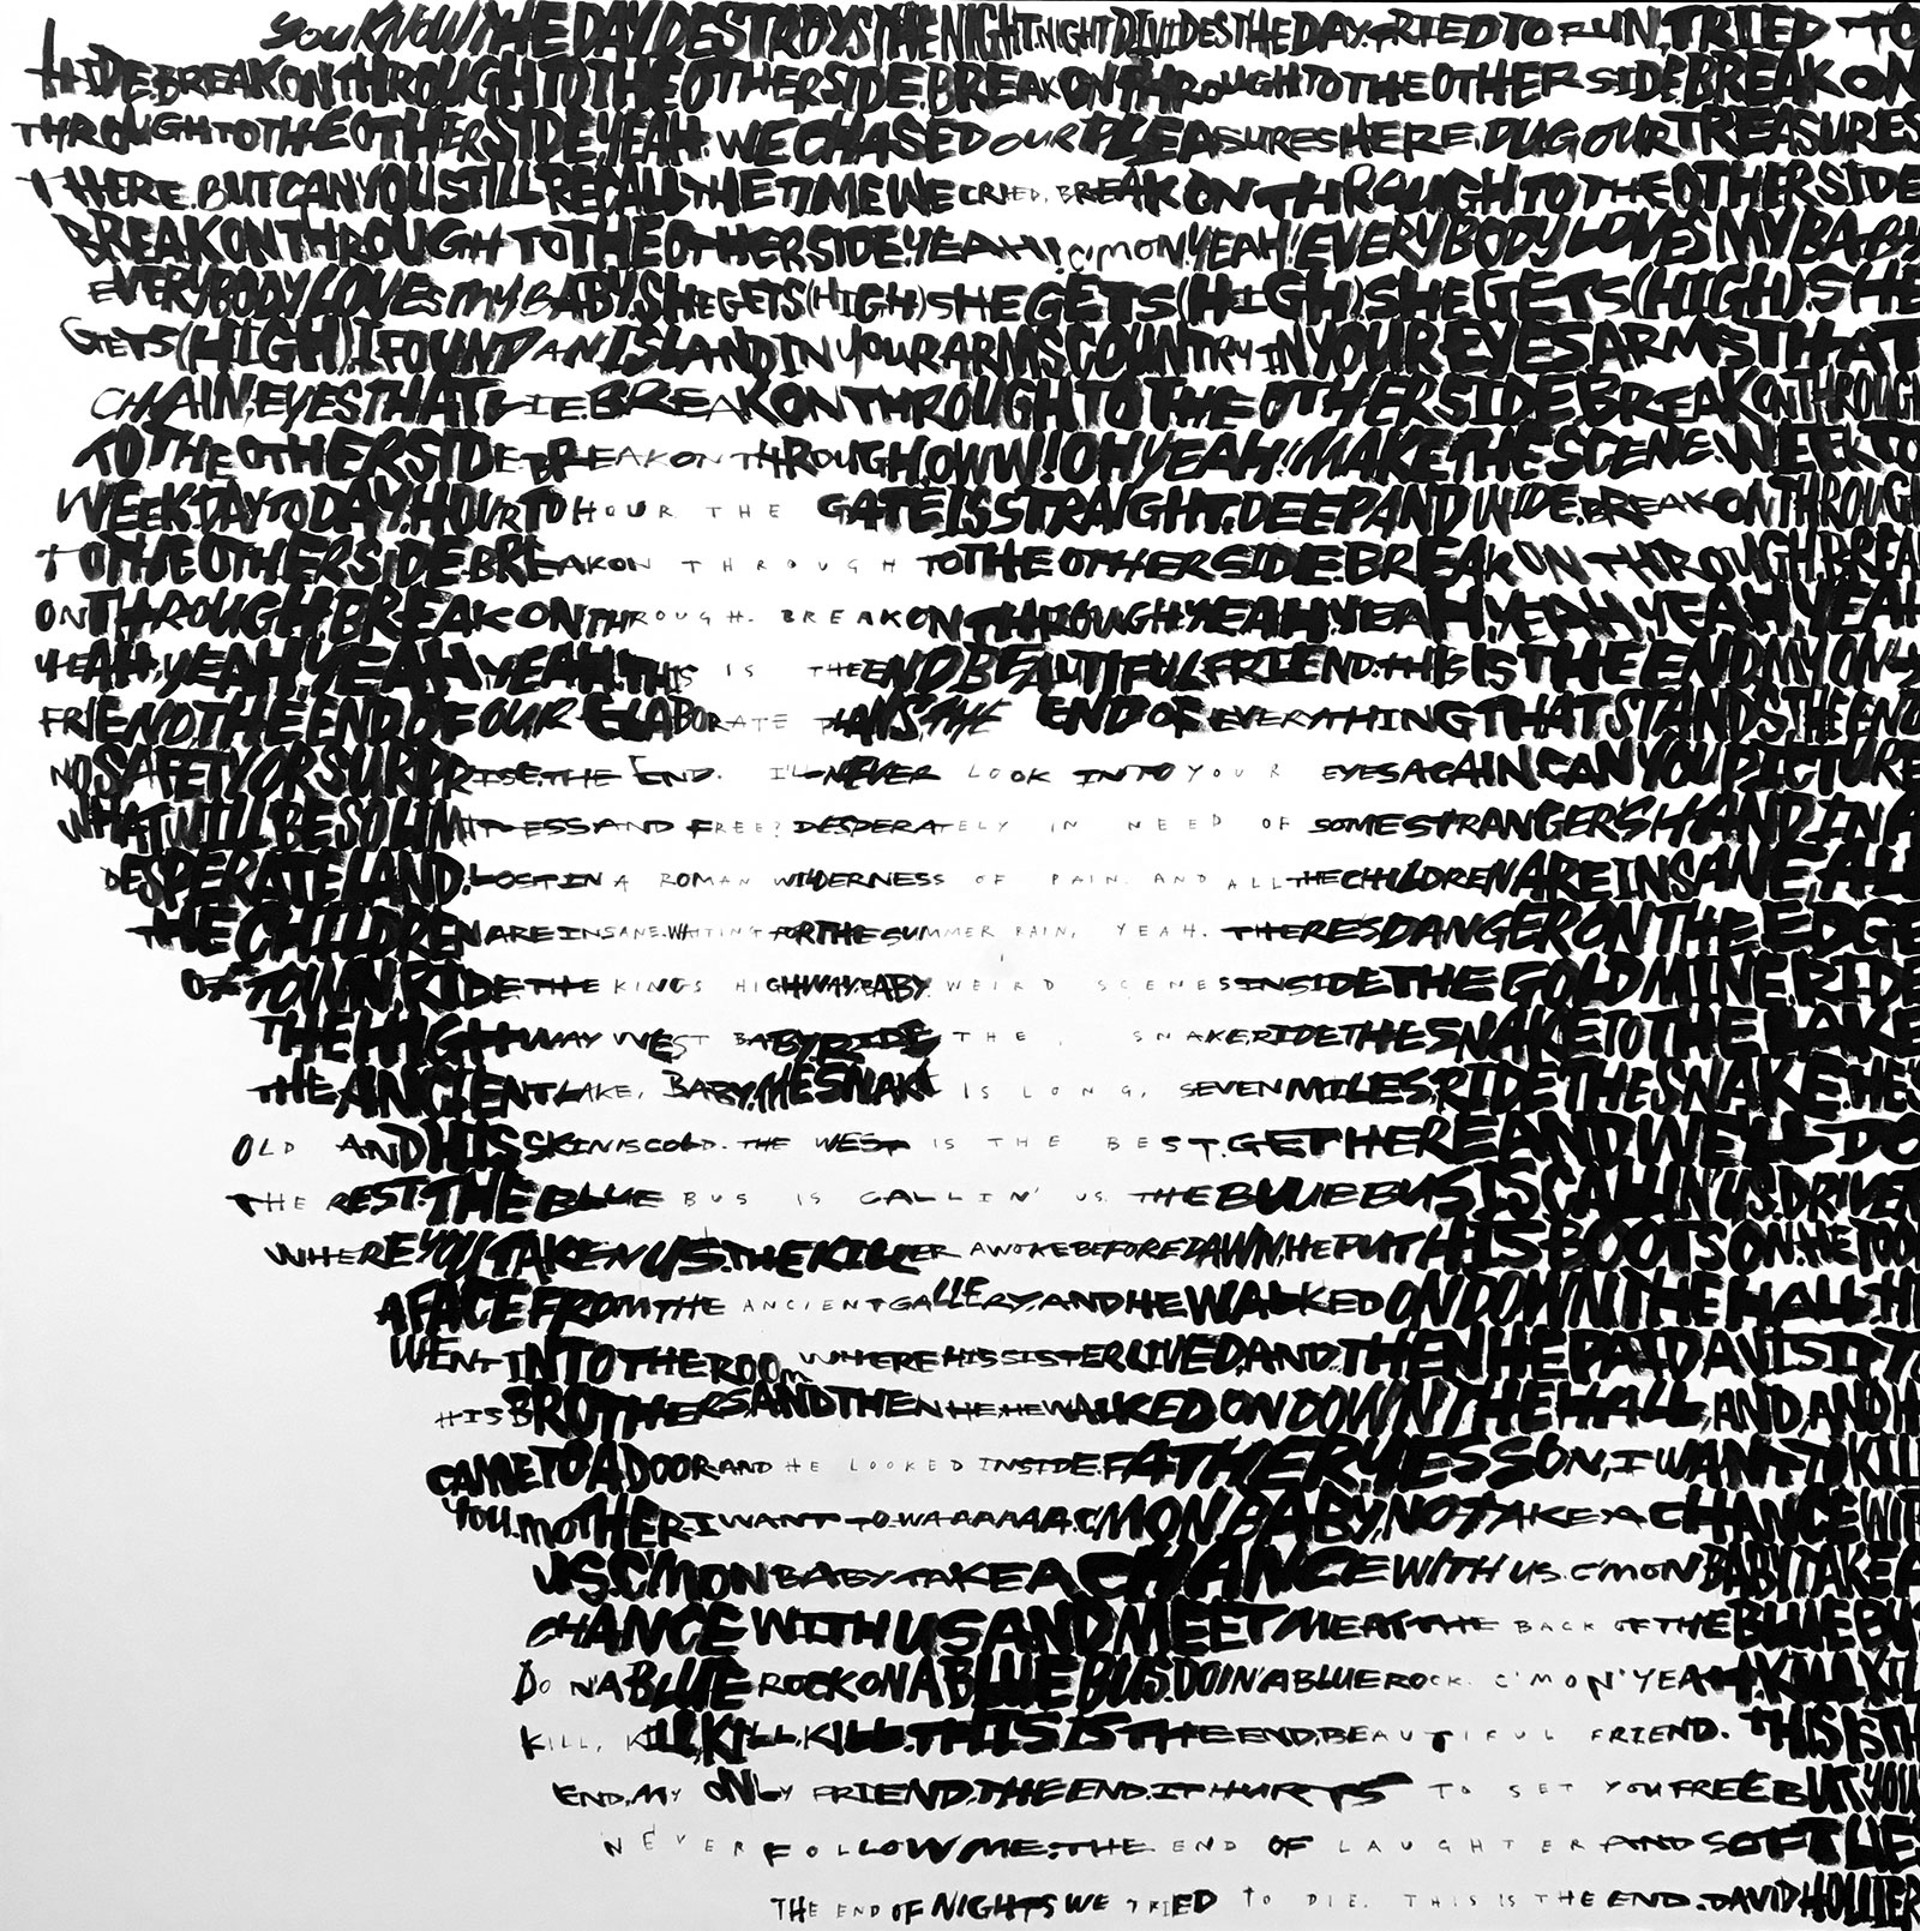 Jim Morrison (Text: 'Break on Through' and 'The End' by The Doors) by David Hollier